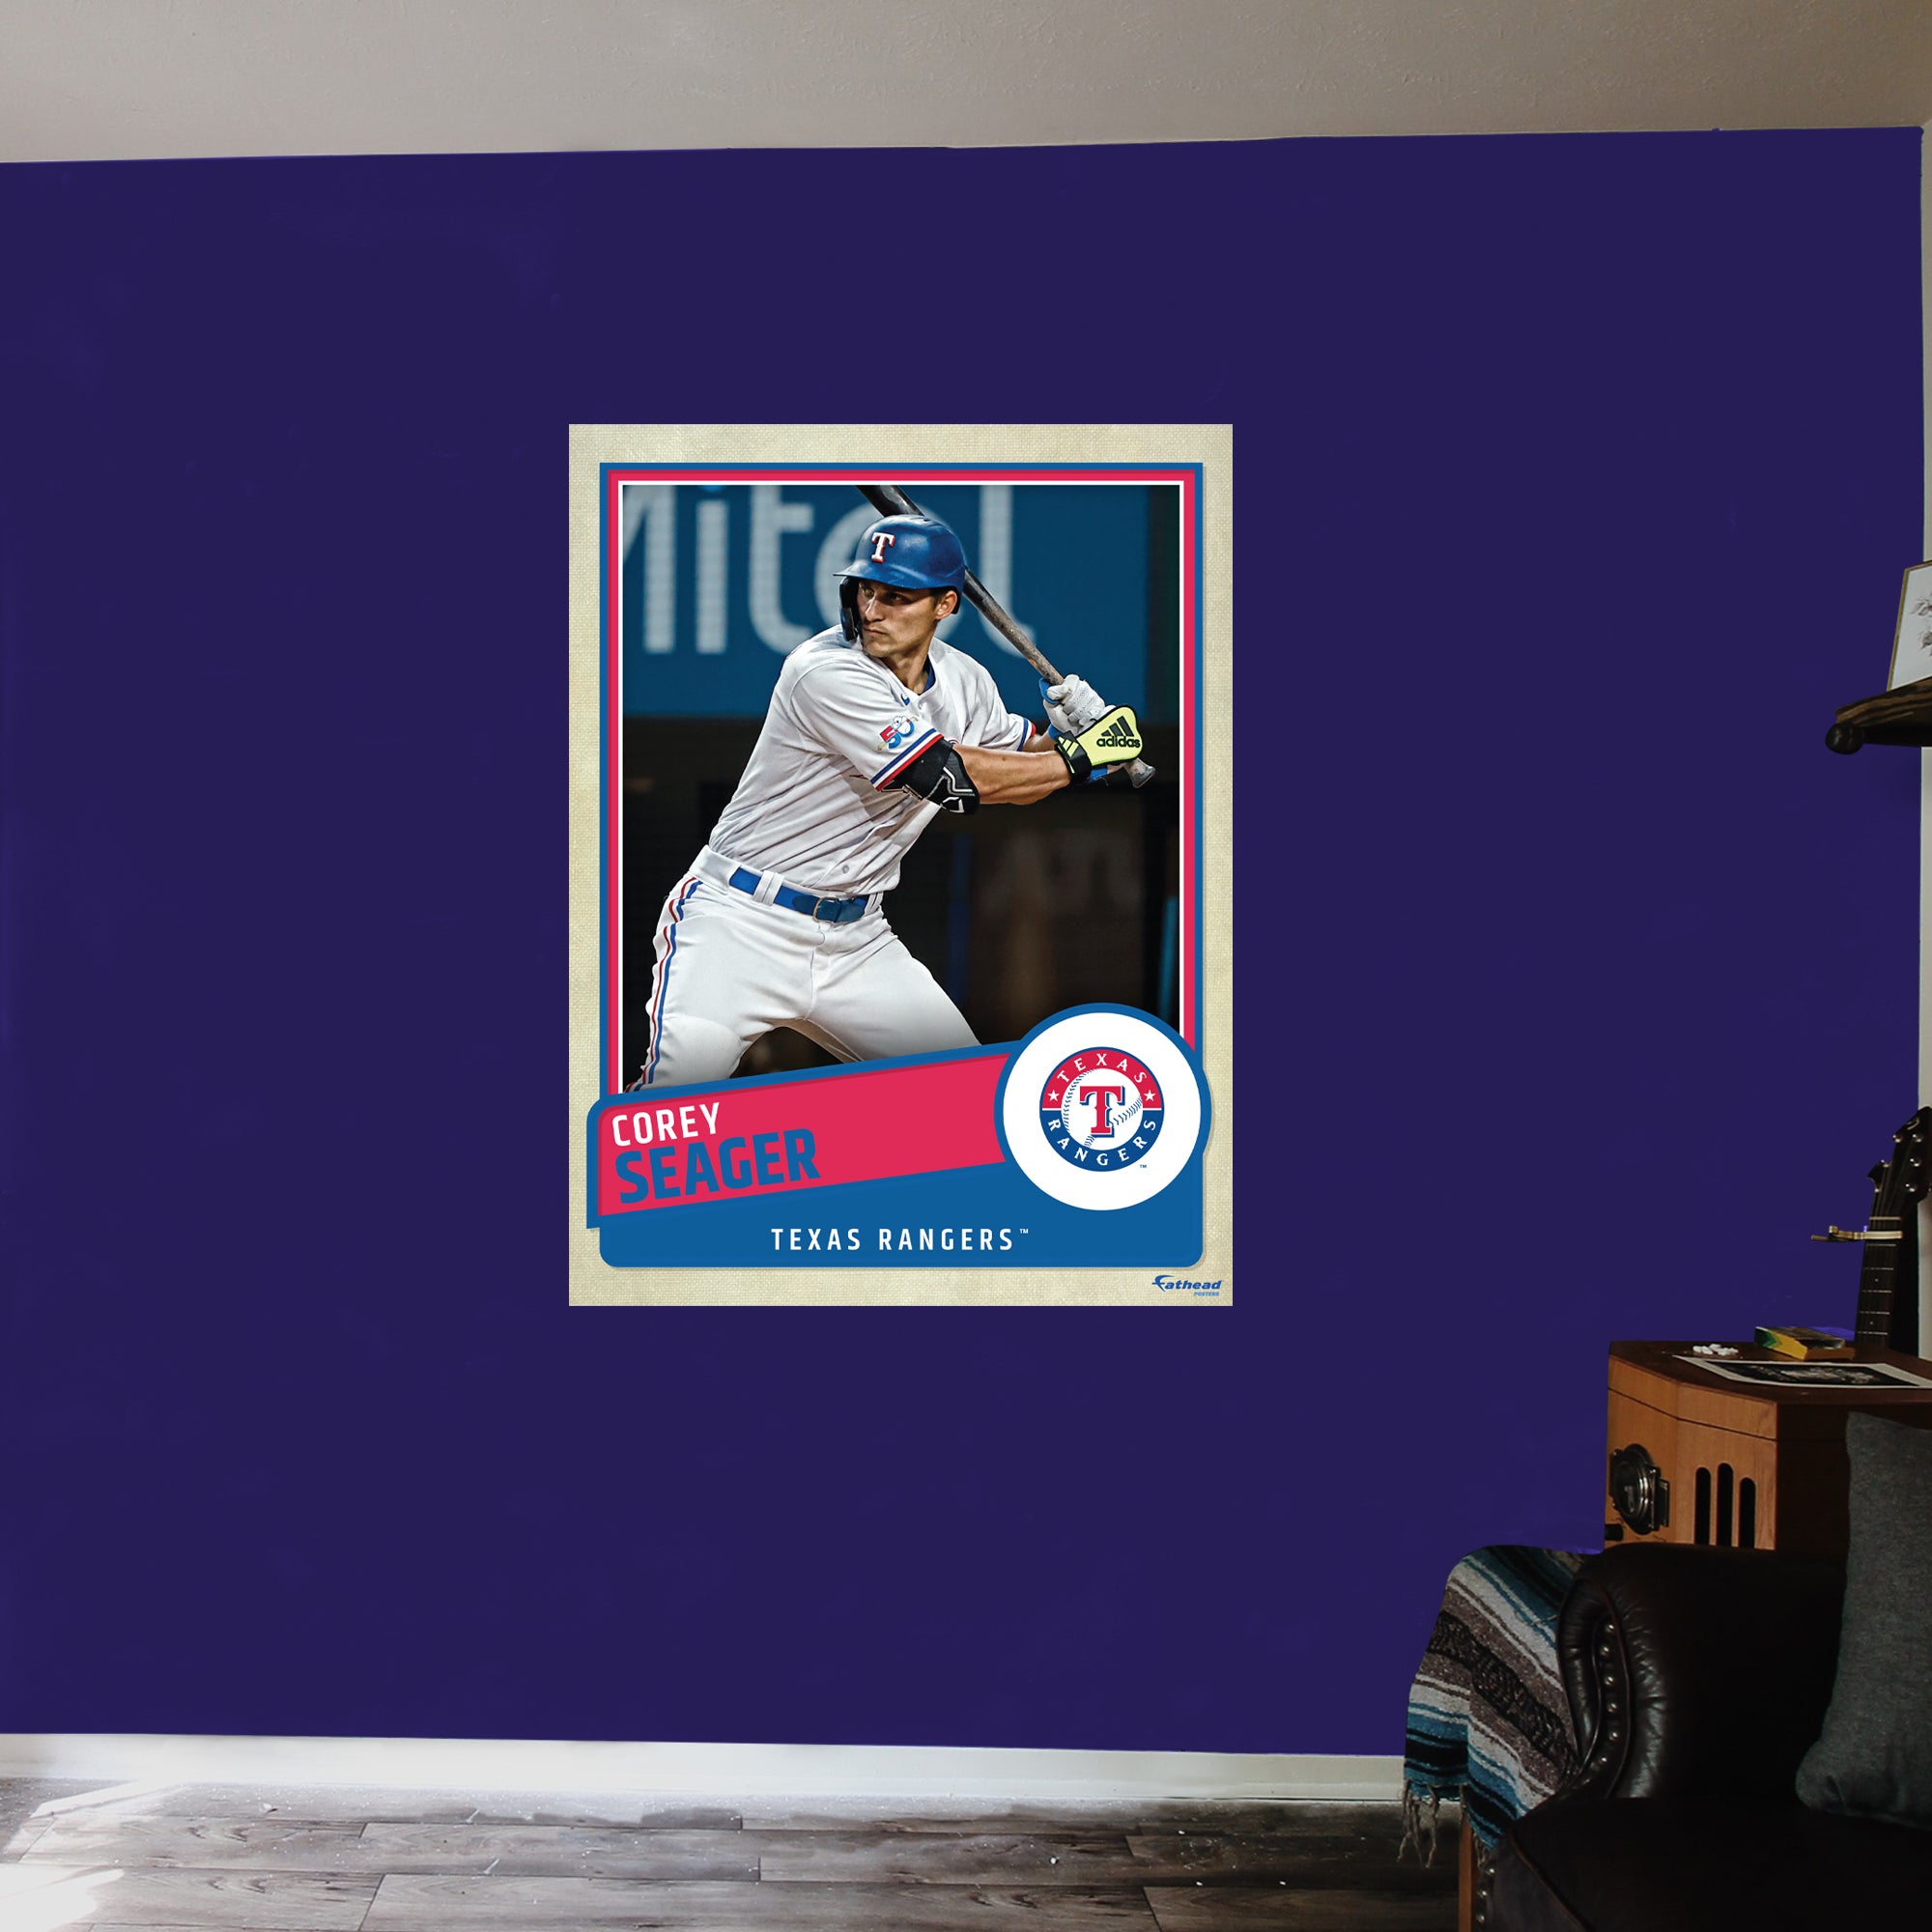 Texas Rangers: Corey Seager 2022 Poster - Officially Licensed MLB Remo –  Fathead